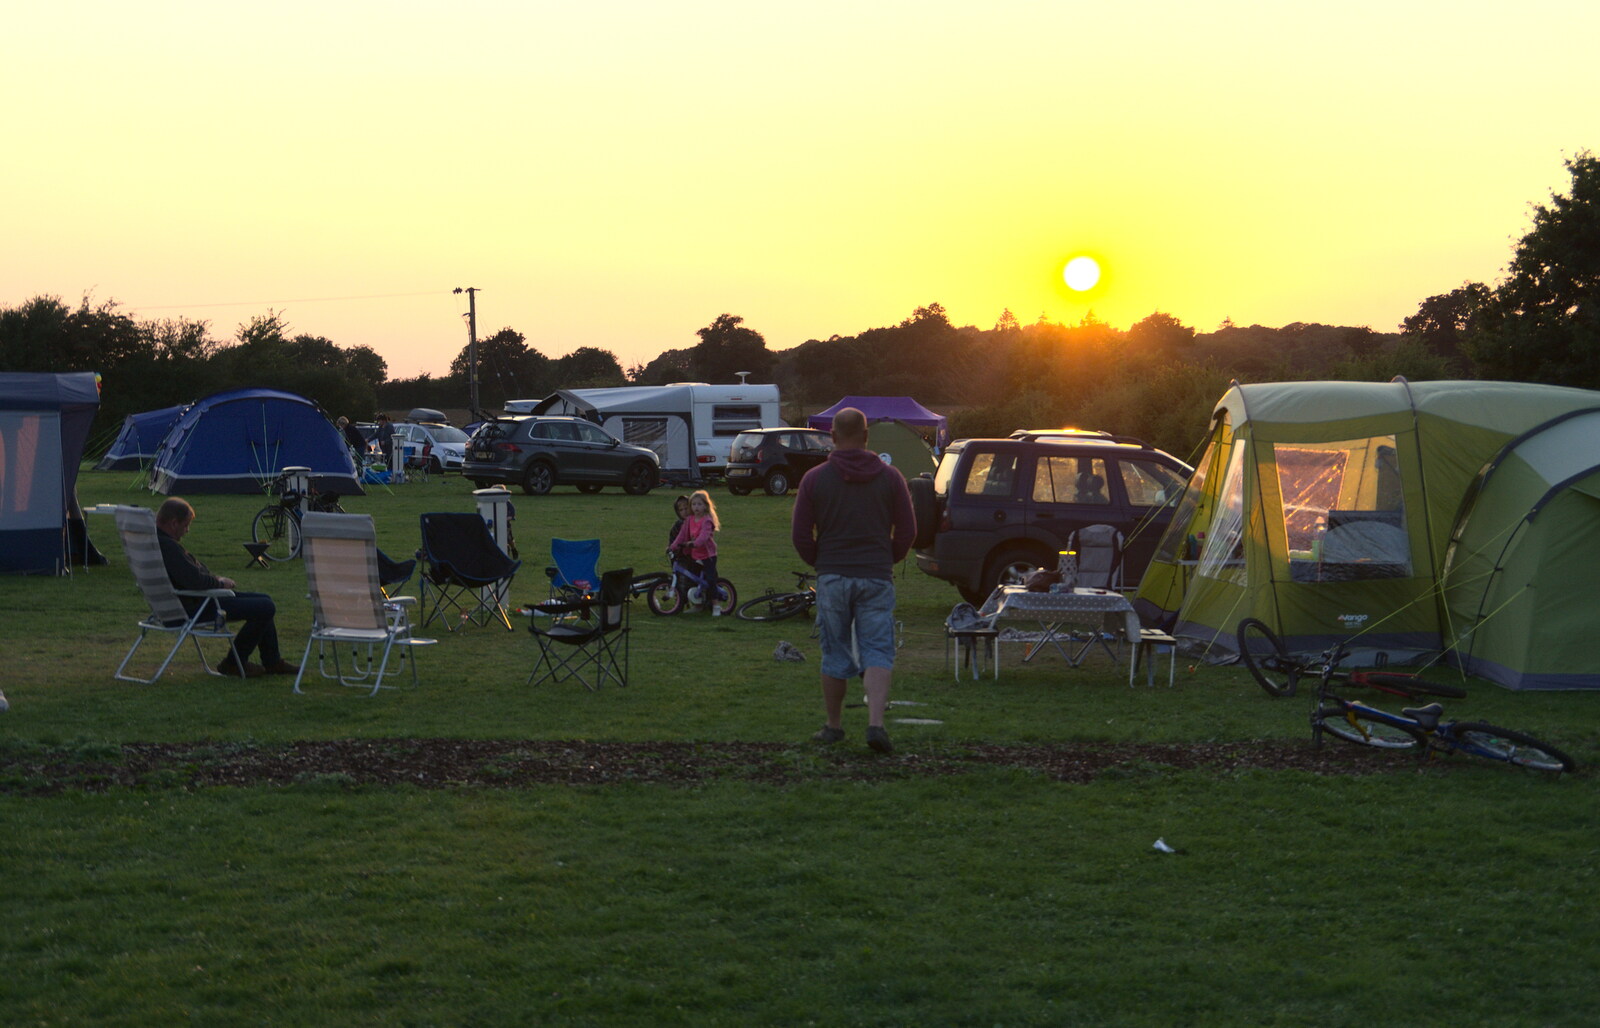 Our pitches in the sunset from A Spot of Camping, Alton Water, Stutton, Suffolk - 1st September 2018